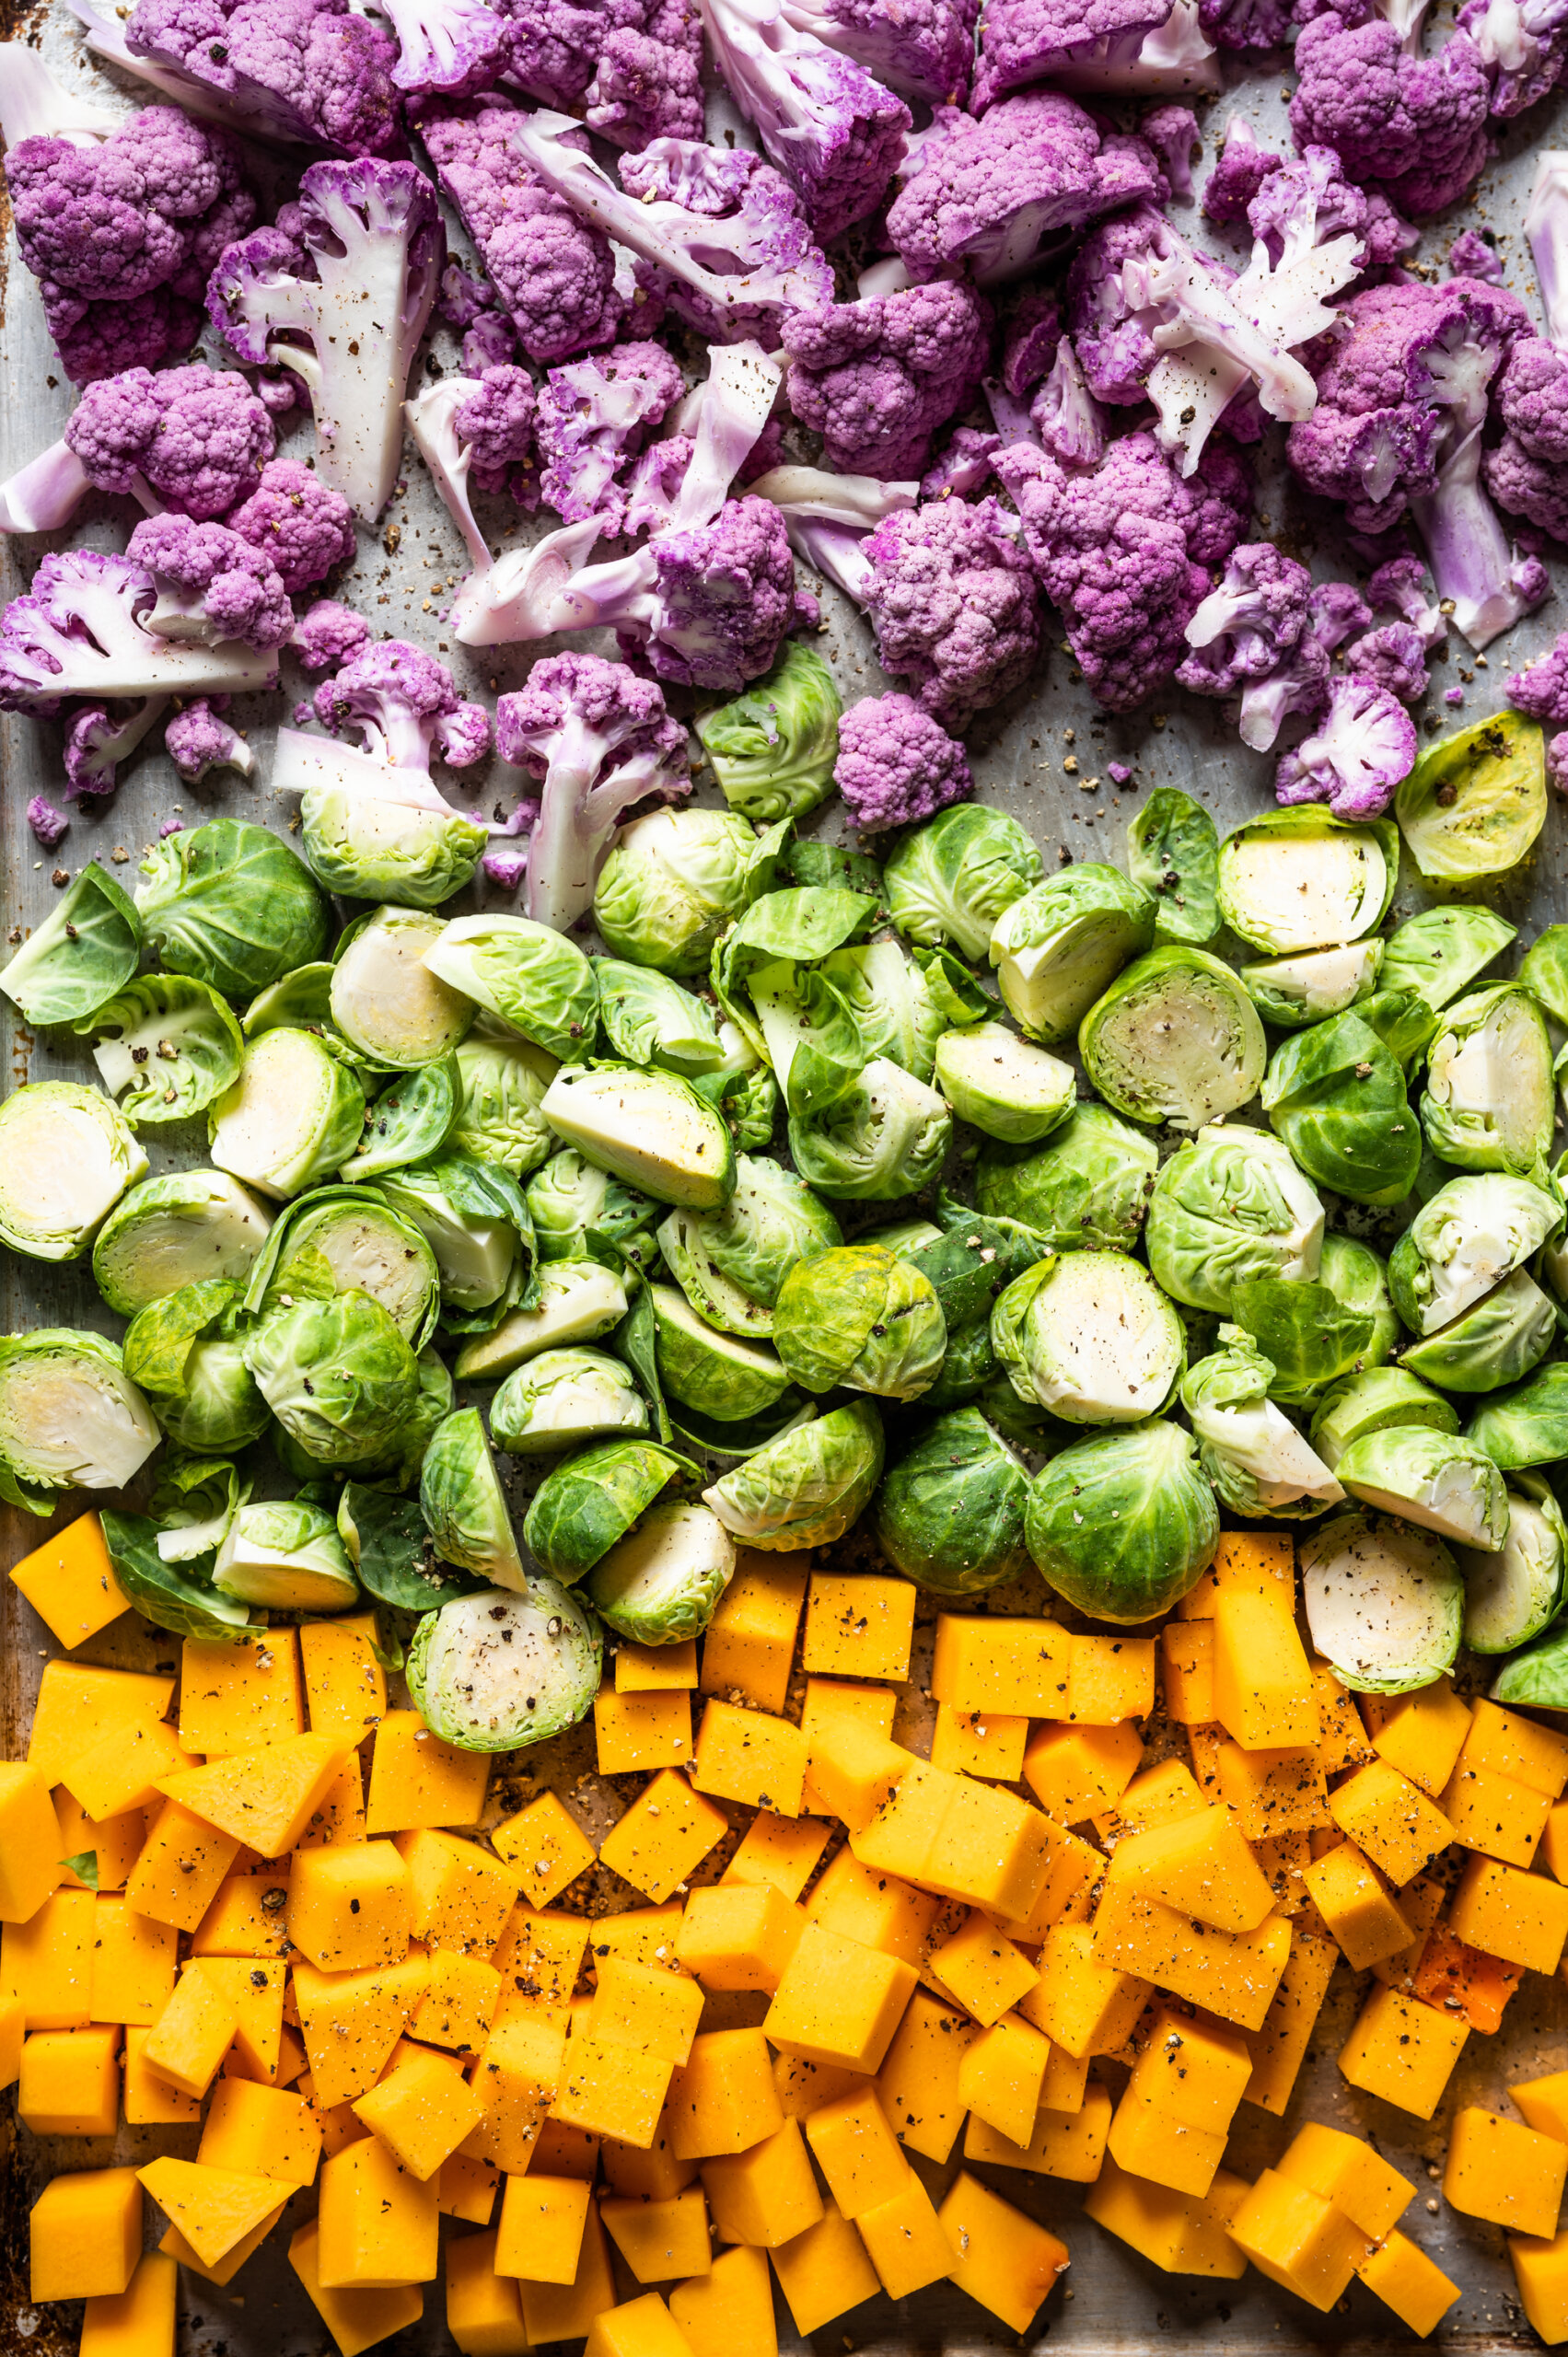 Chopped cauliflower, brussels sprouts, and butternut squash